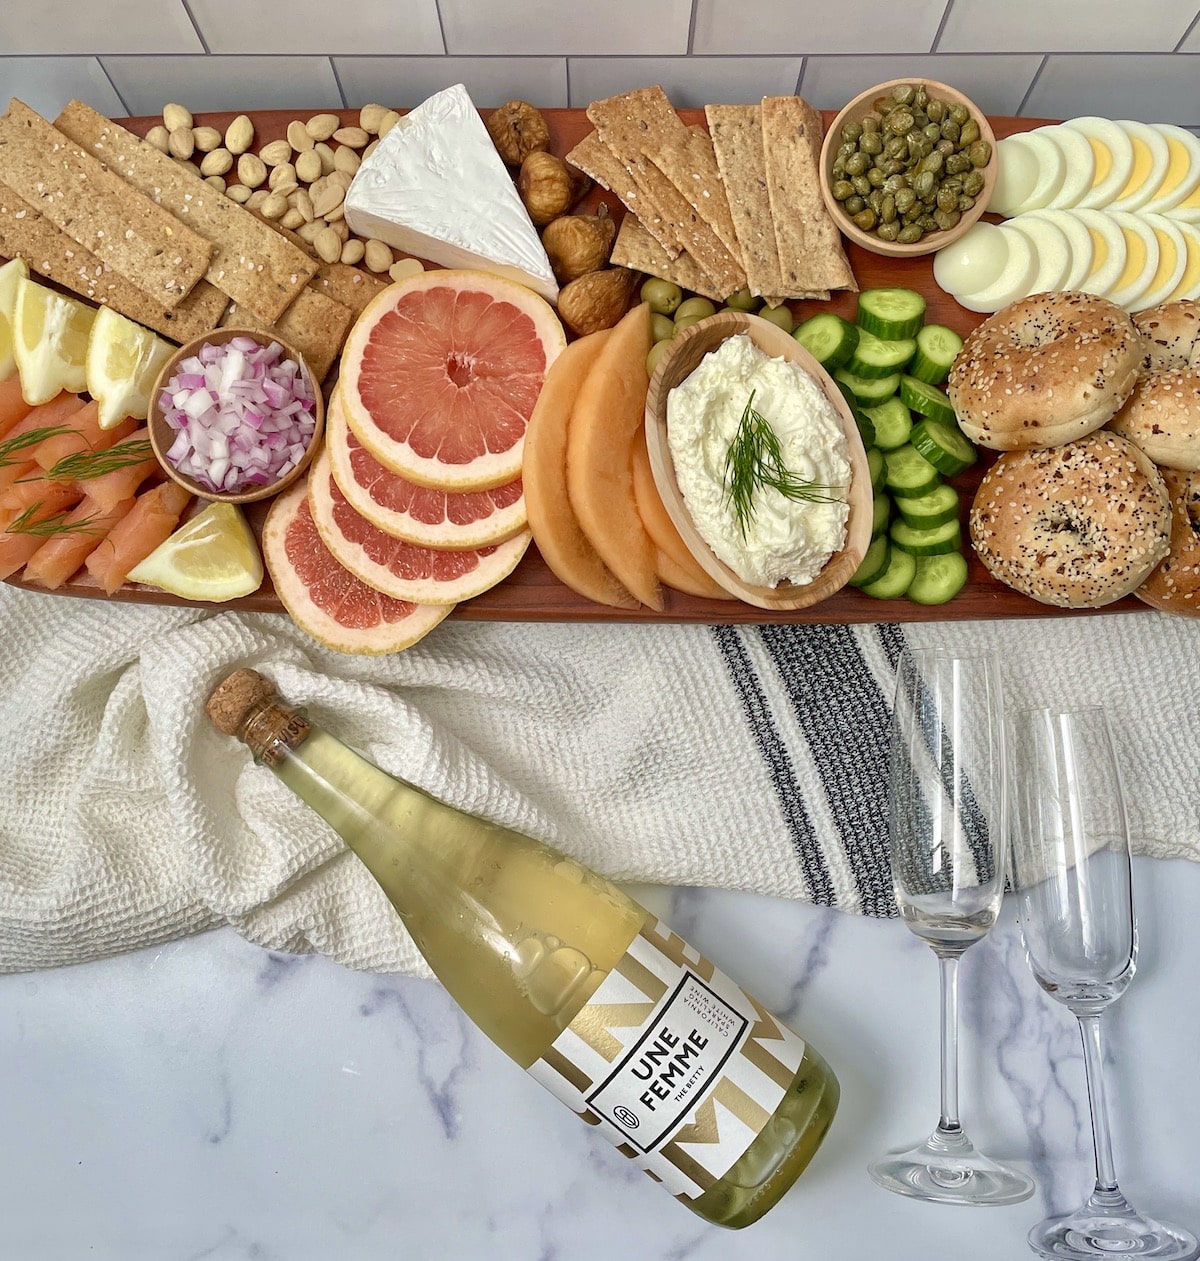 Breakfast Charcuterie board with sparkling wine and glasses.